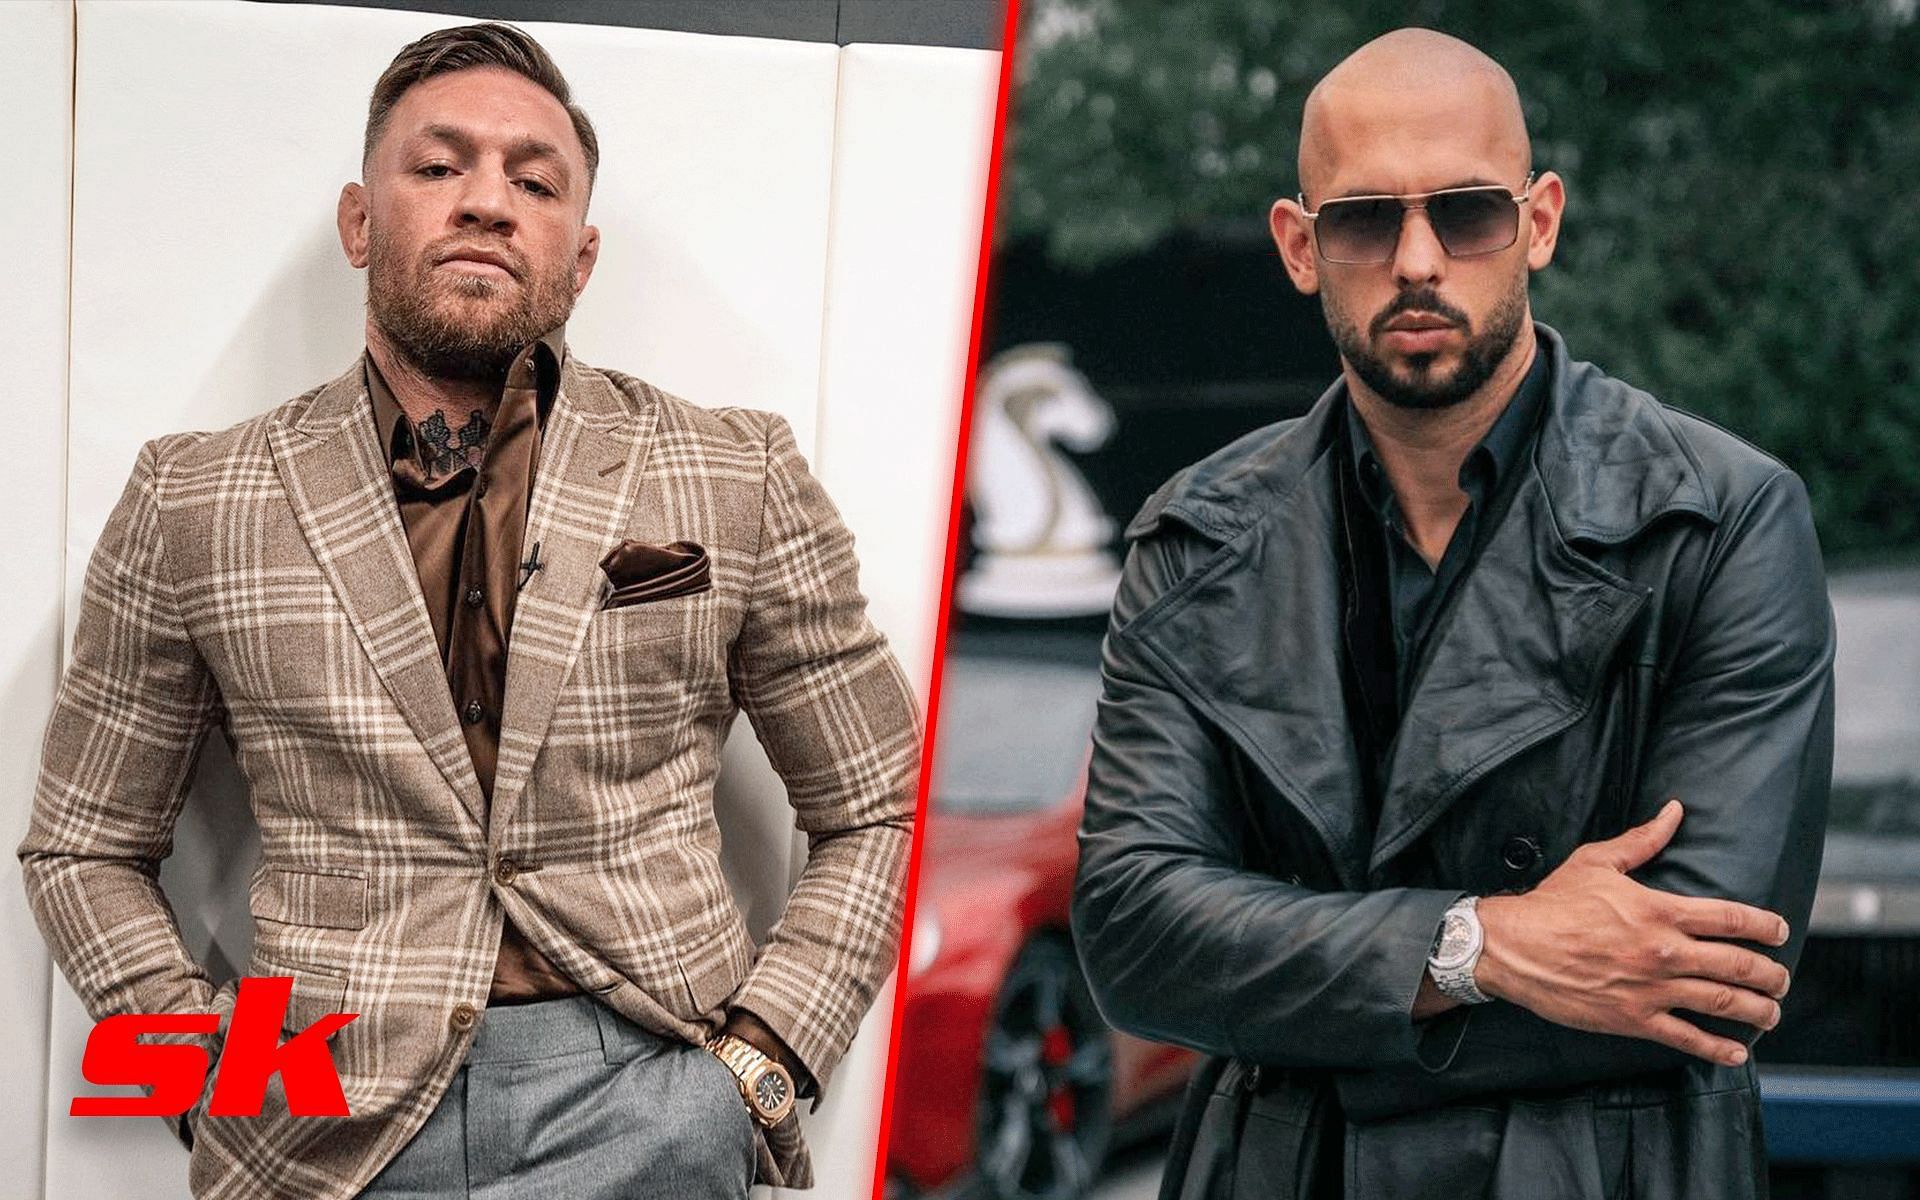 Conor McGregor (Left), Andrew Tate (Right) [Image courtesy: @thenotroiousmma on Instagram, @EmoryTatee on Twitter]